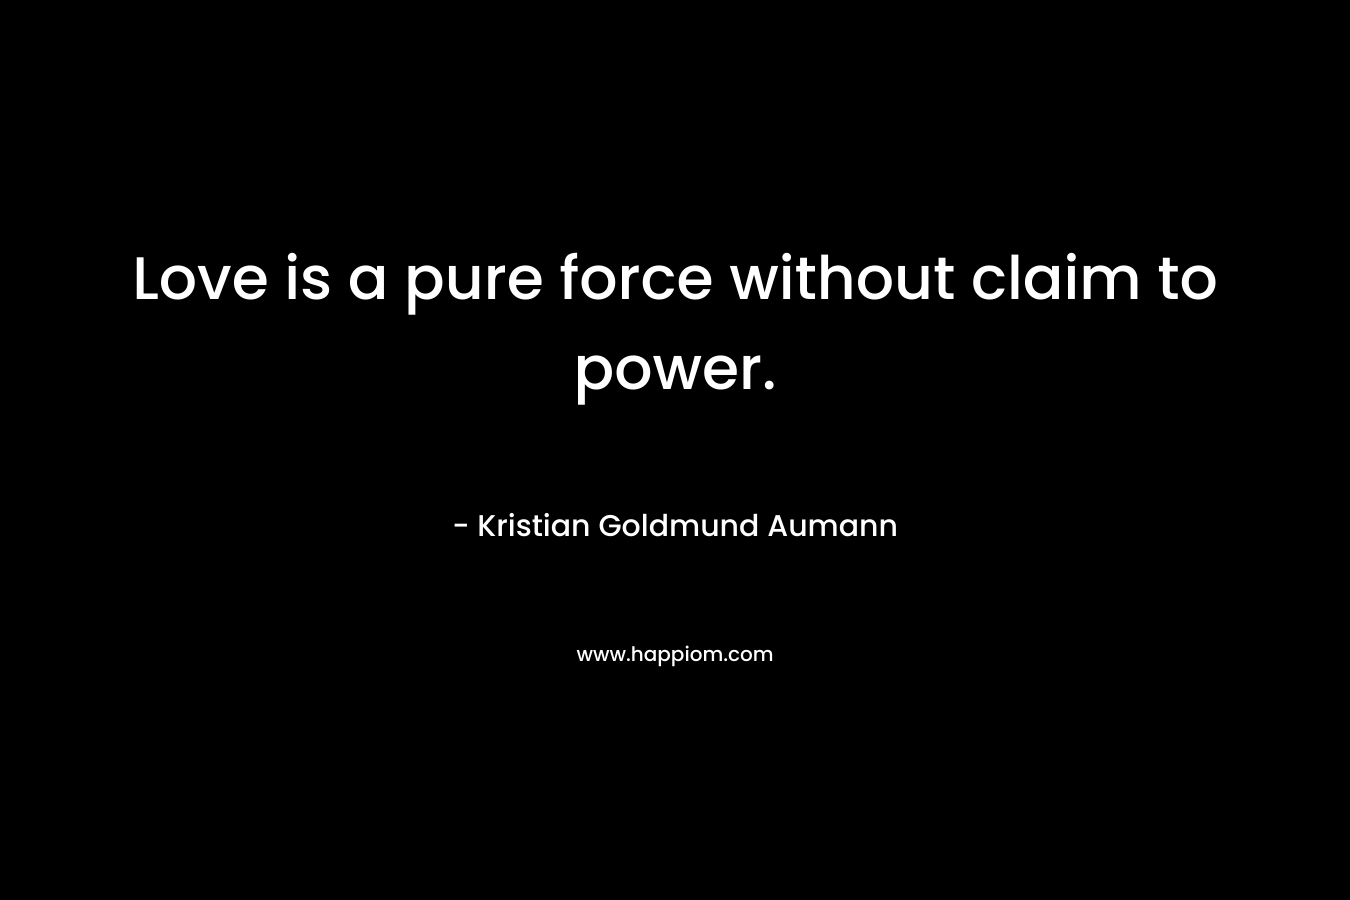 Love is a pure force without claim to power. – Kristian Goldmund Aumann